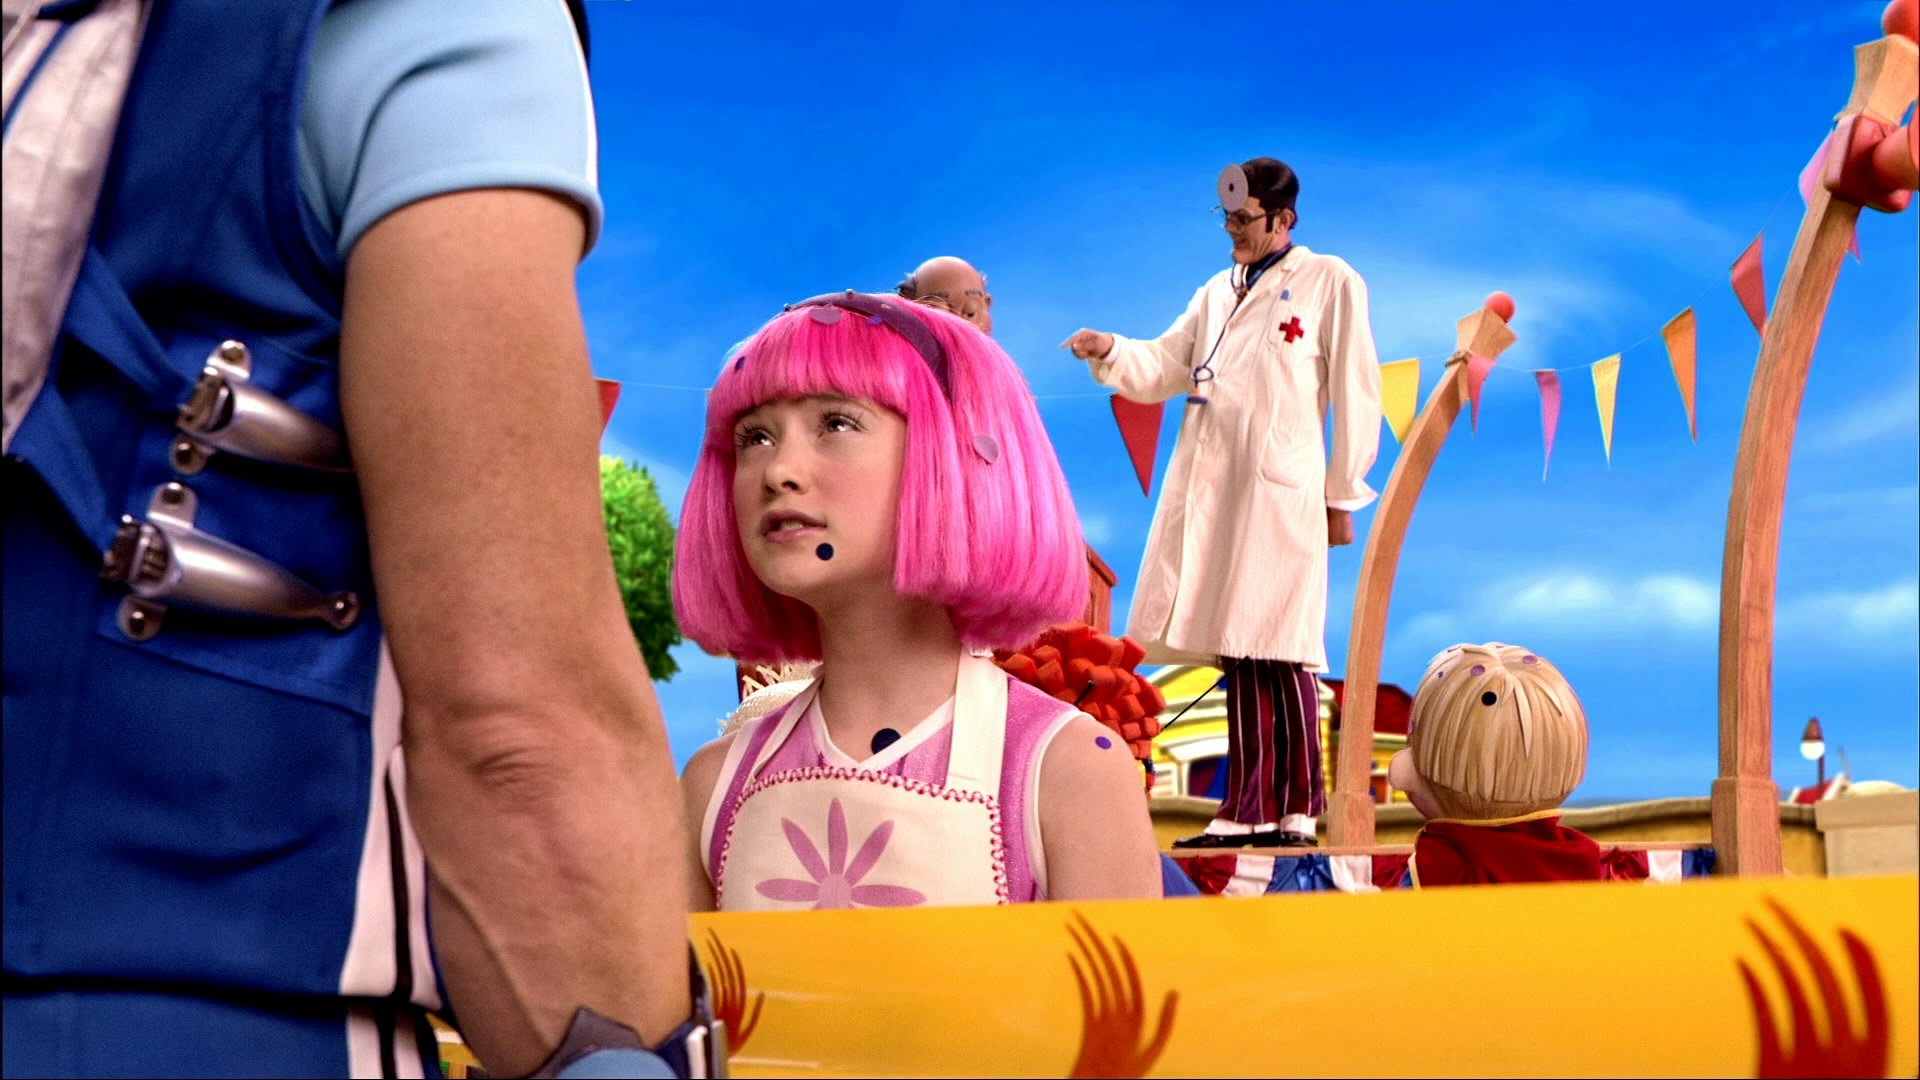 1920x1080 LazyTown Wallpaper Background Image. 